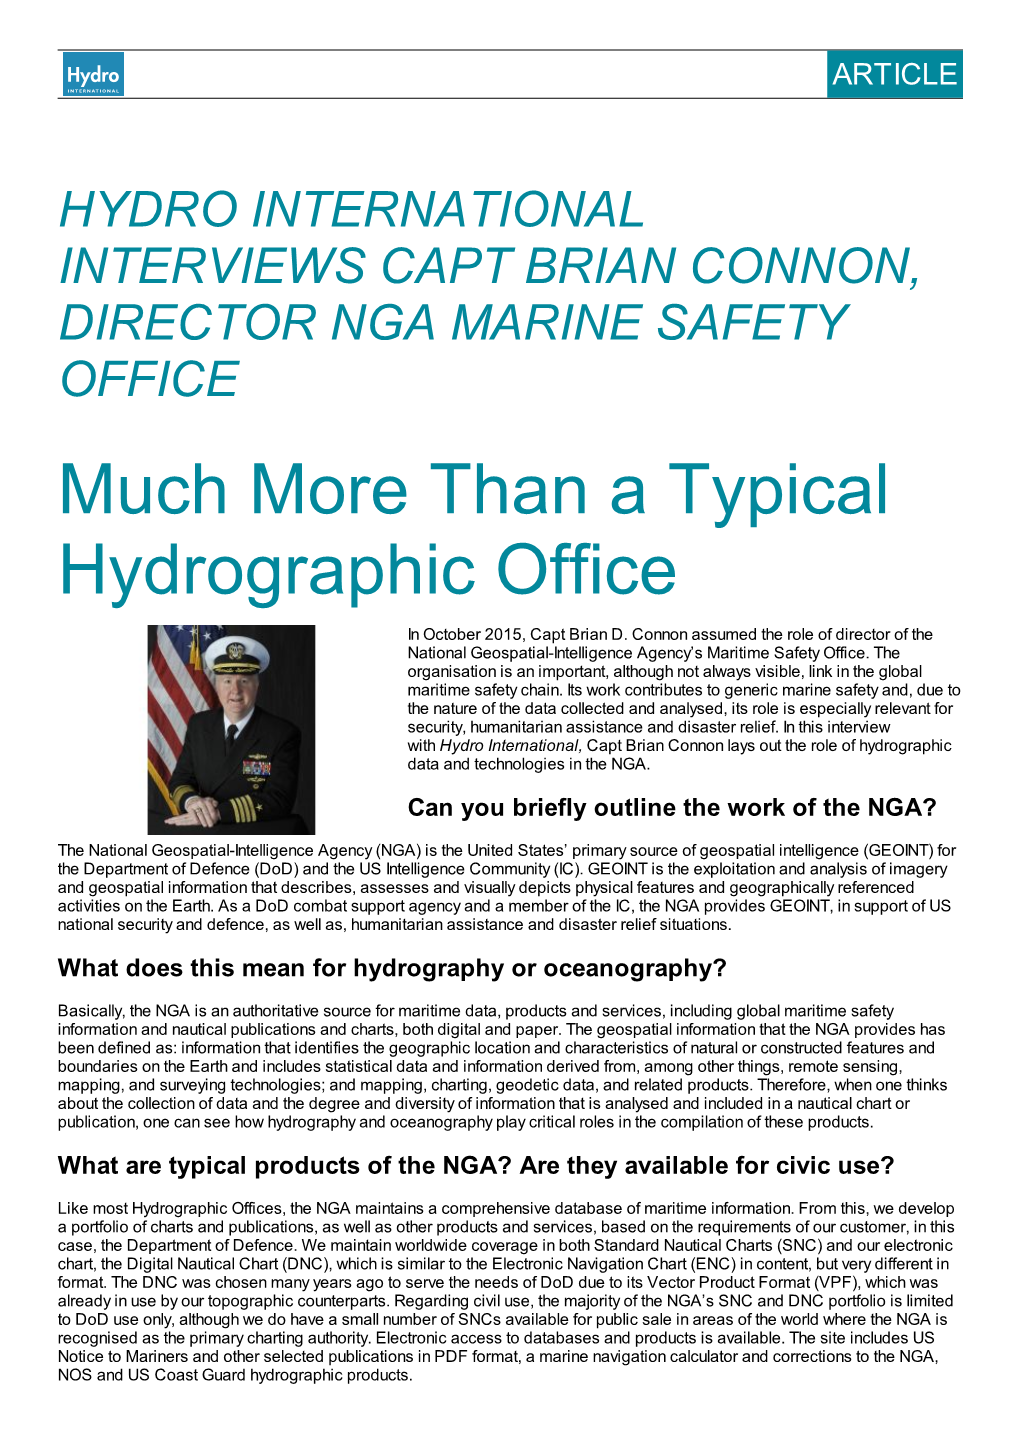 Much More Than a Typical Hydrographic Office